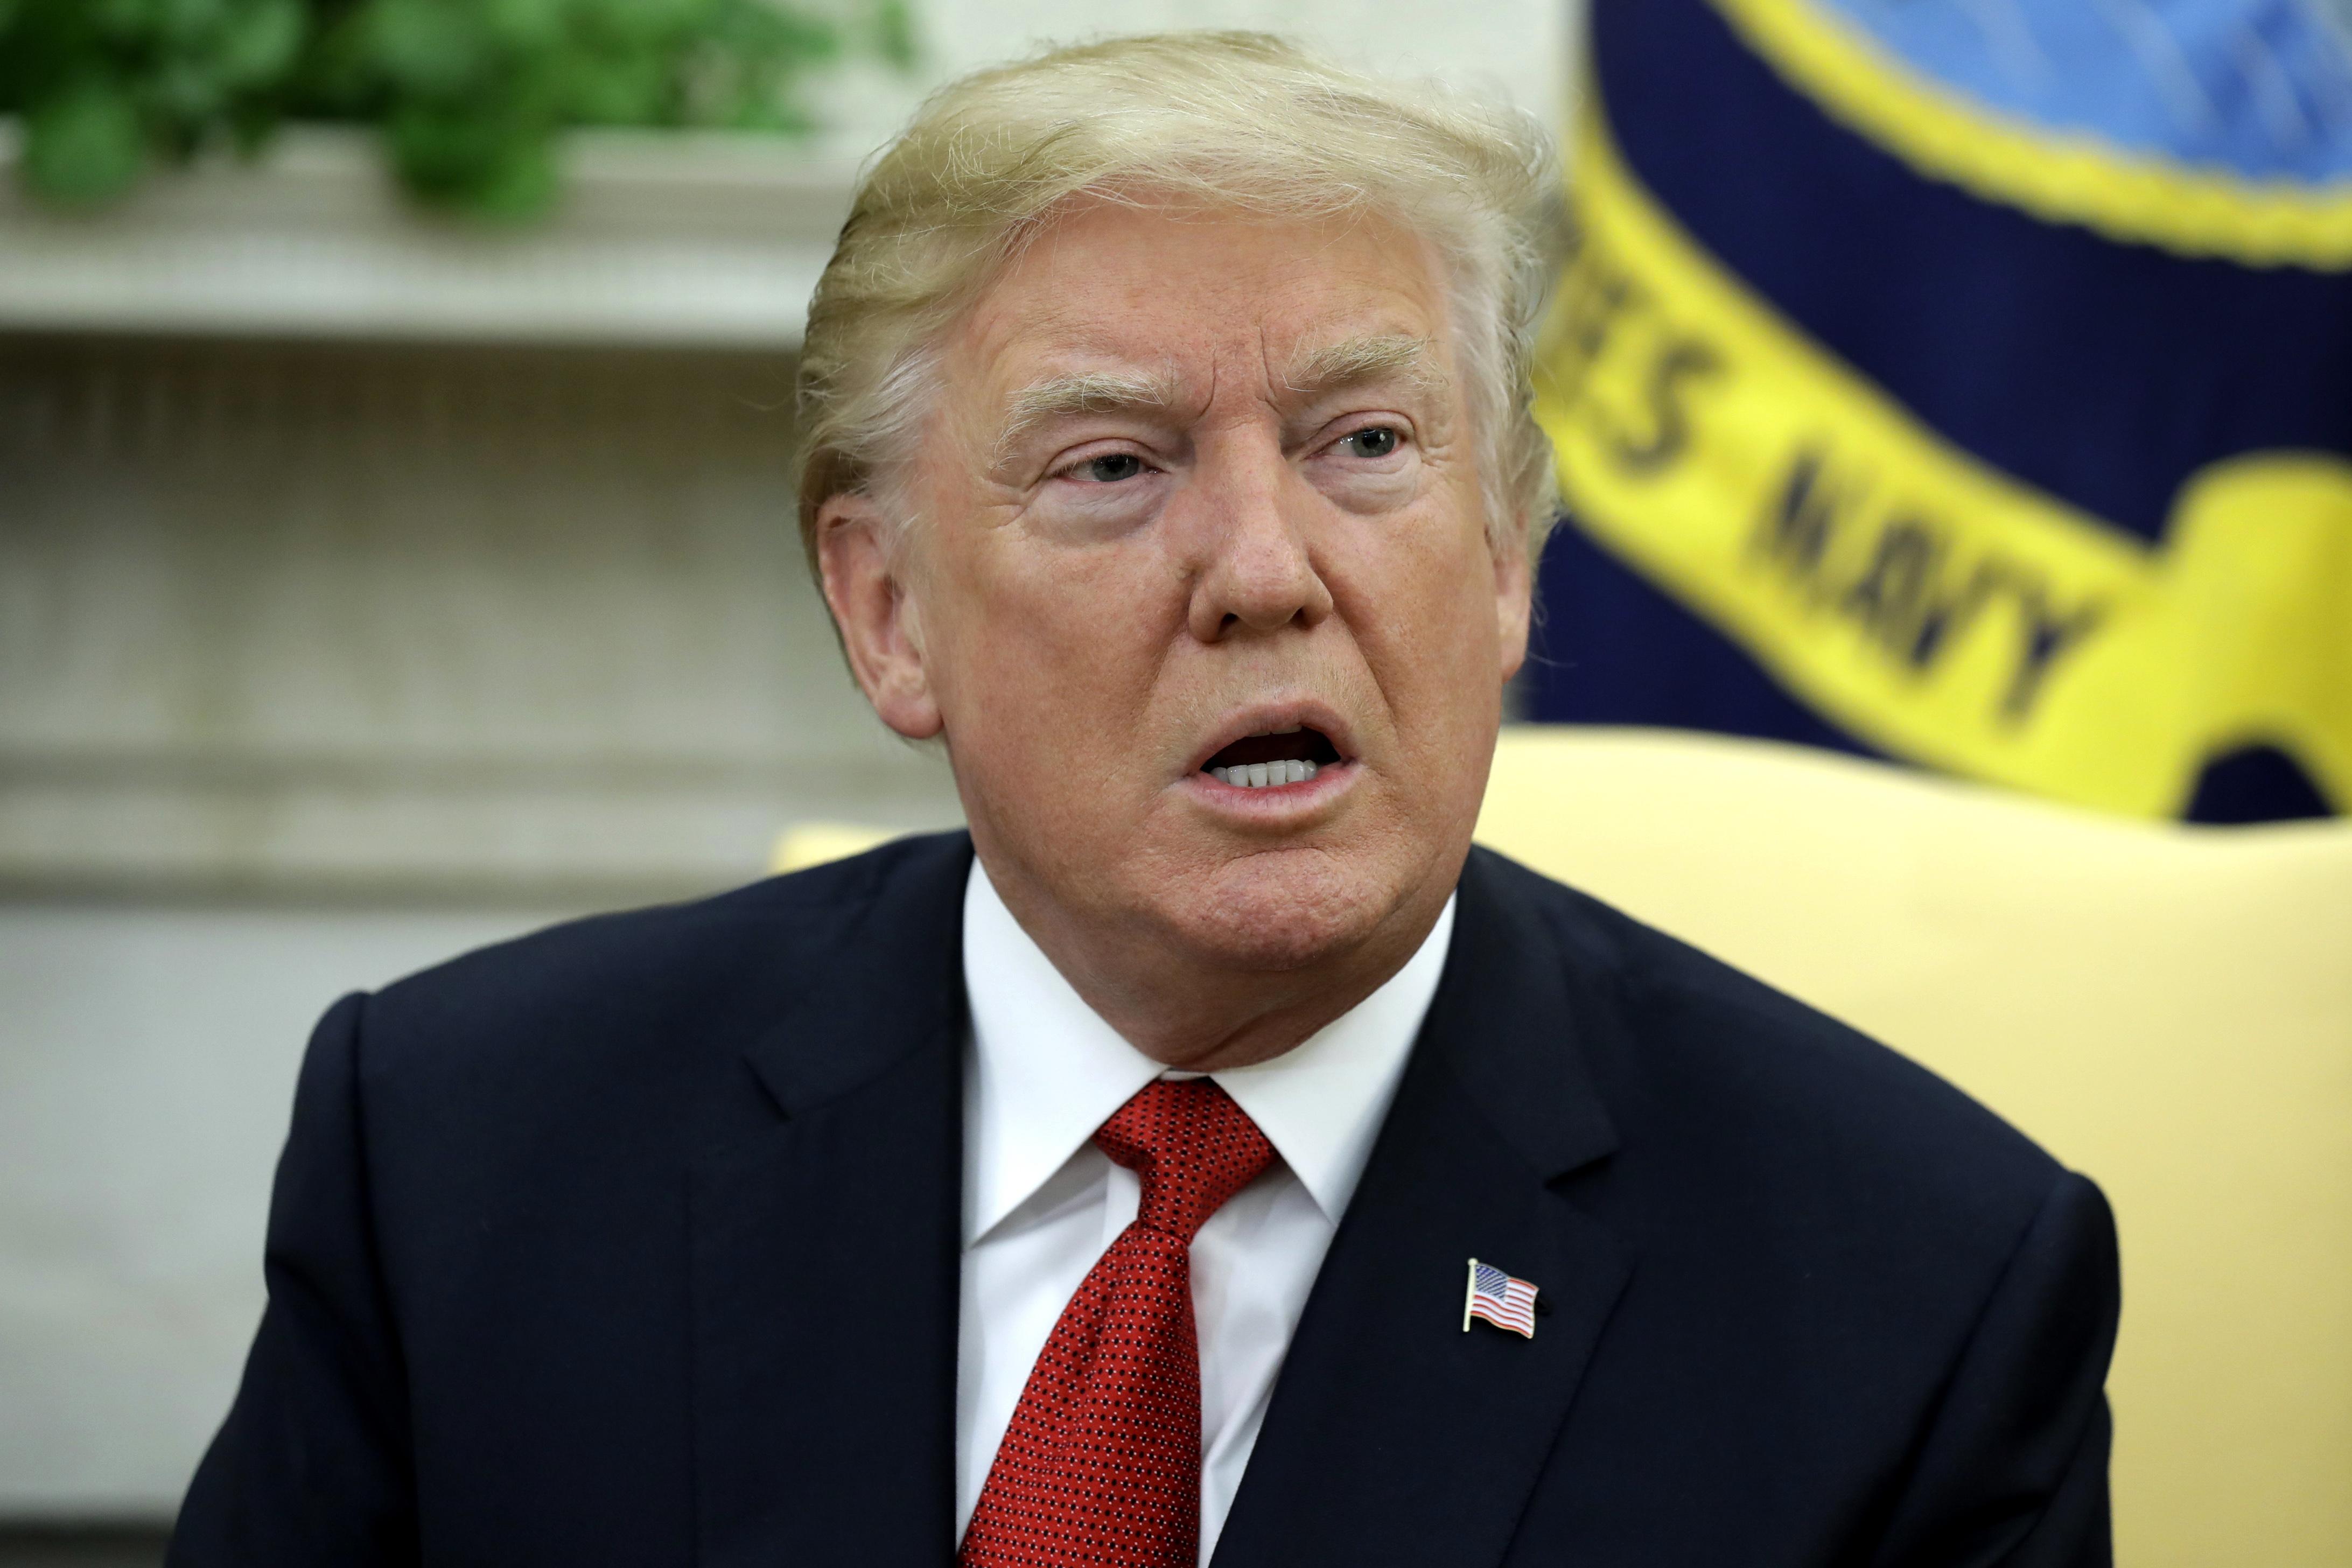 Trump fumes as Mueller probe enters new phase with charges | The Spokesman-Review4368 x 2912